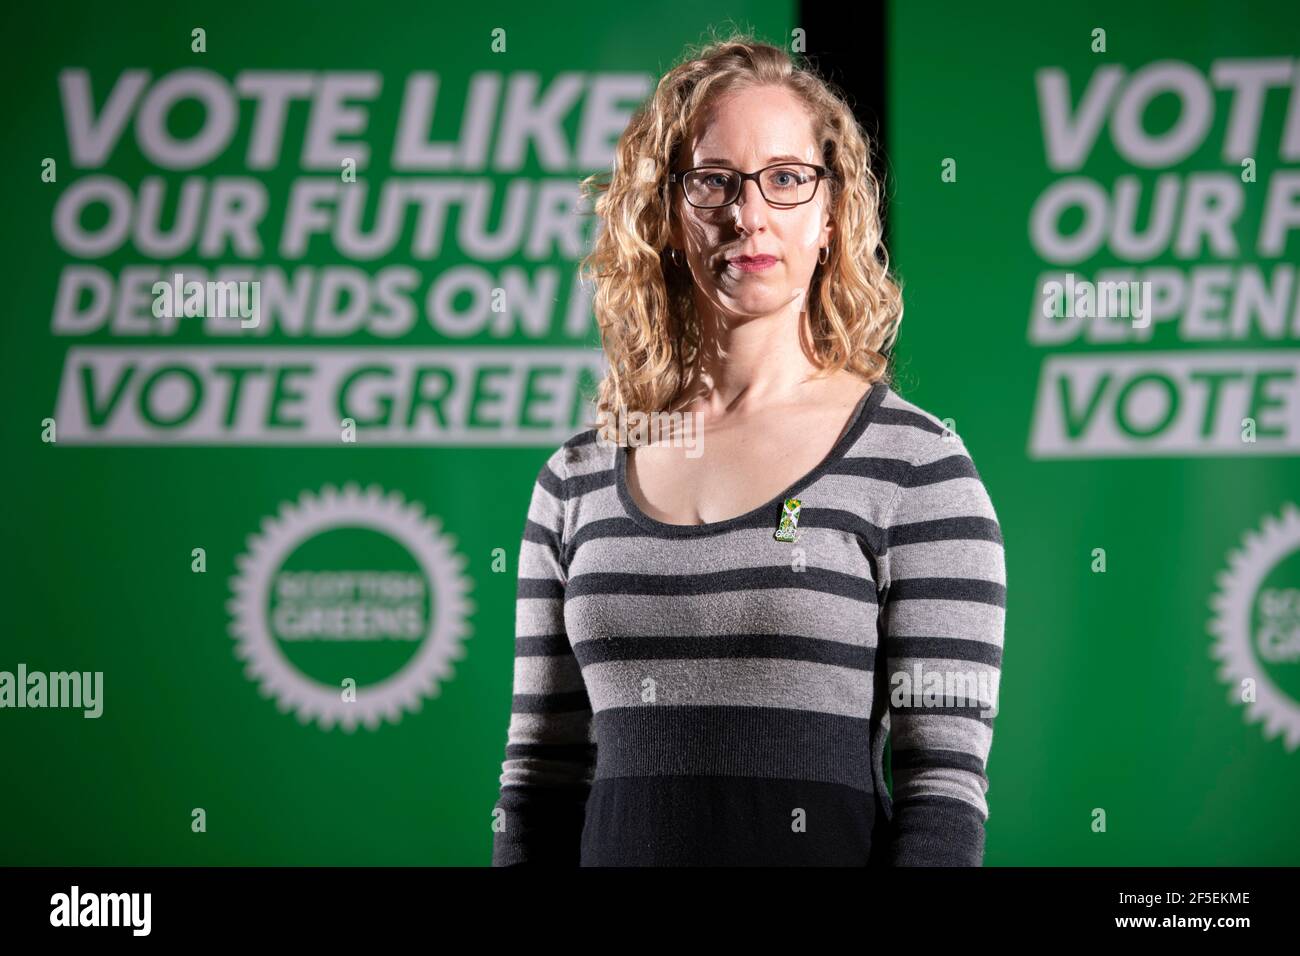 North Queensferry, Scotland, UK. 26 March 2021. PICTURED: Lorna Slater - Co Leader of the Scottish Green Party. Scottish Greens will today mark the start of their party conference by unveiling an end of term ‘report card' highlighting the party's achievements during the last parliamentary term. Credit: Colin Fisher/Alamy Live News Stock Photo